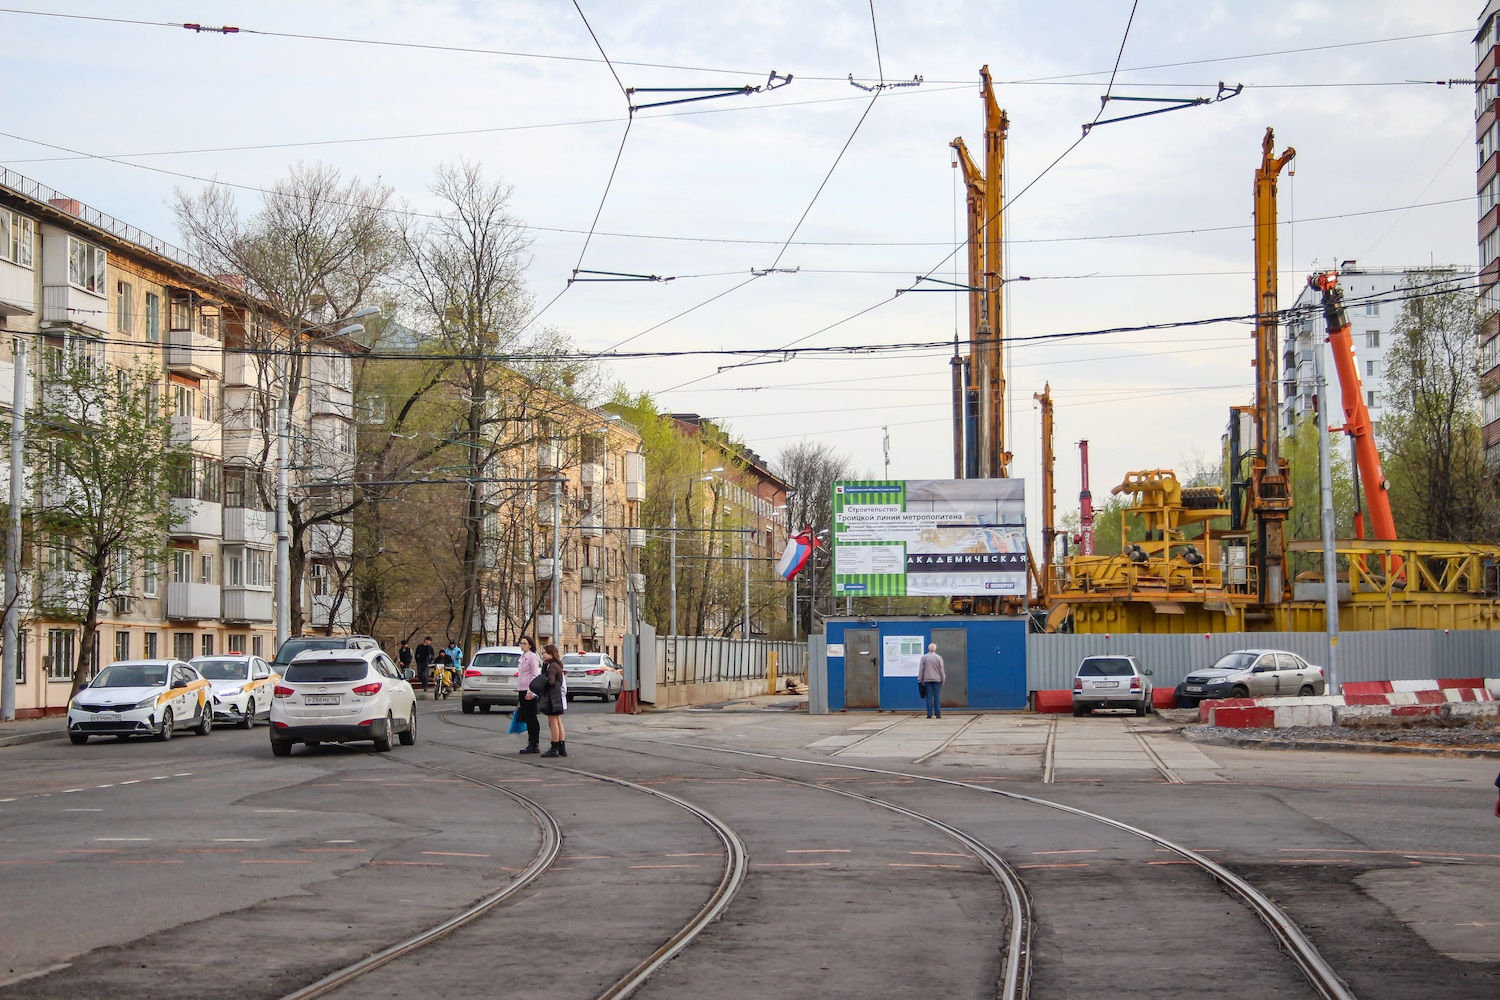 Moscou — Construction and repairs; Moscou — Miscellaneous photos; Moscou — Tram lines: South-Western Administrative District